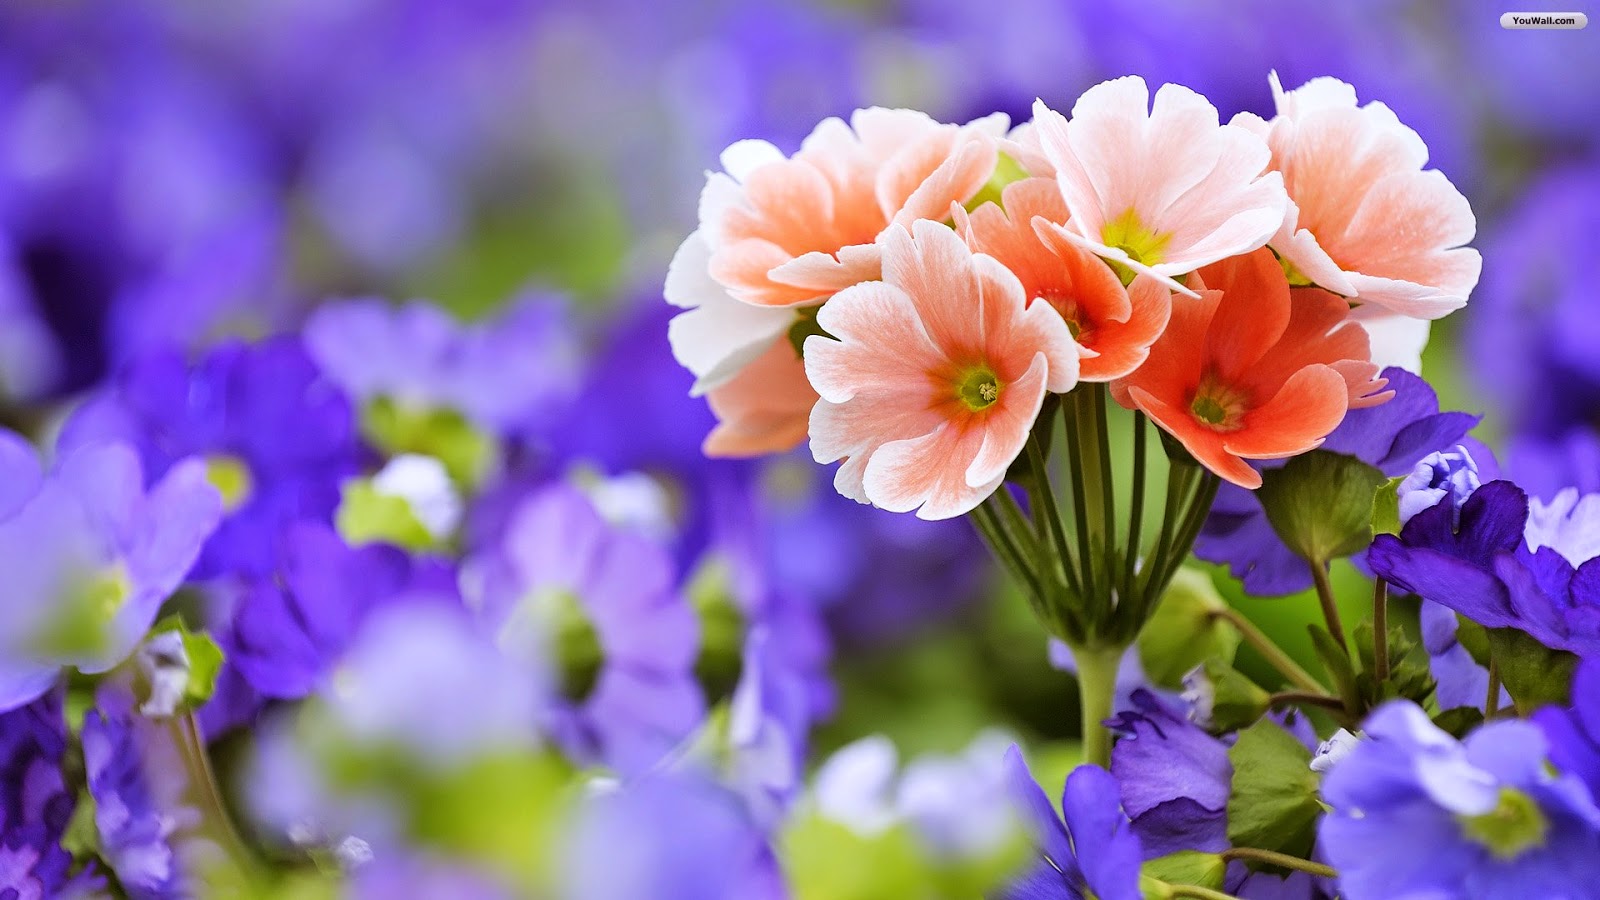 Beautiful Flower Wallpapers in HD - HD Wallpapers - High Quality Wallpapers